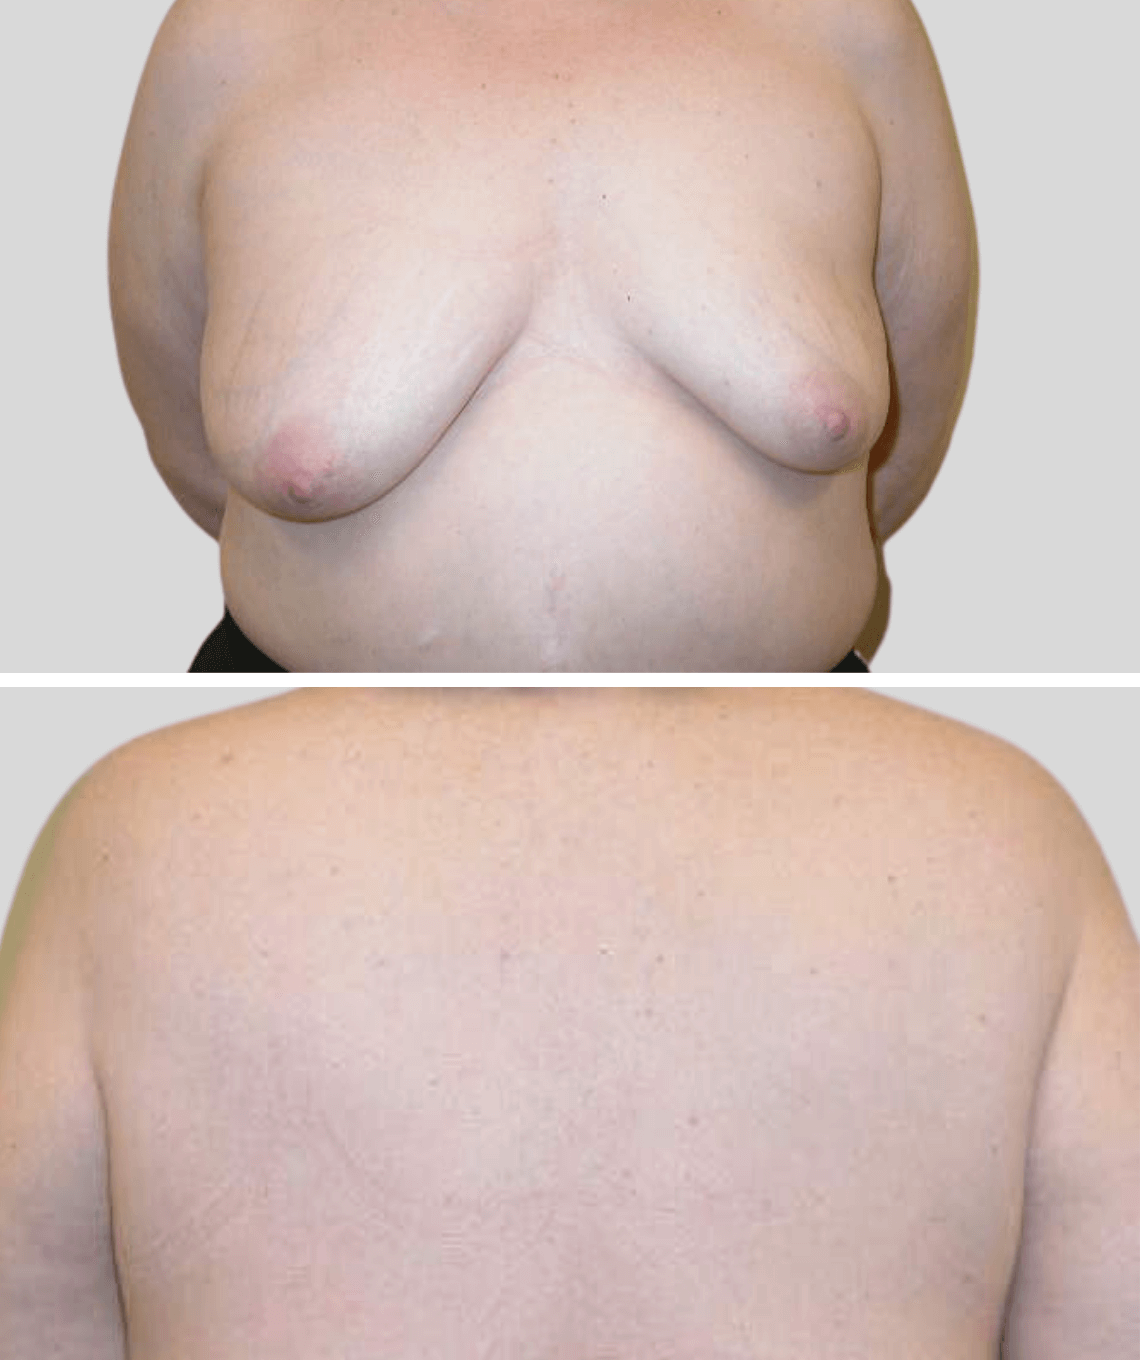 lat flap- before and after photos - before - prma plastic surgery - case 20